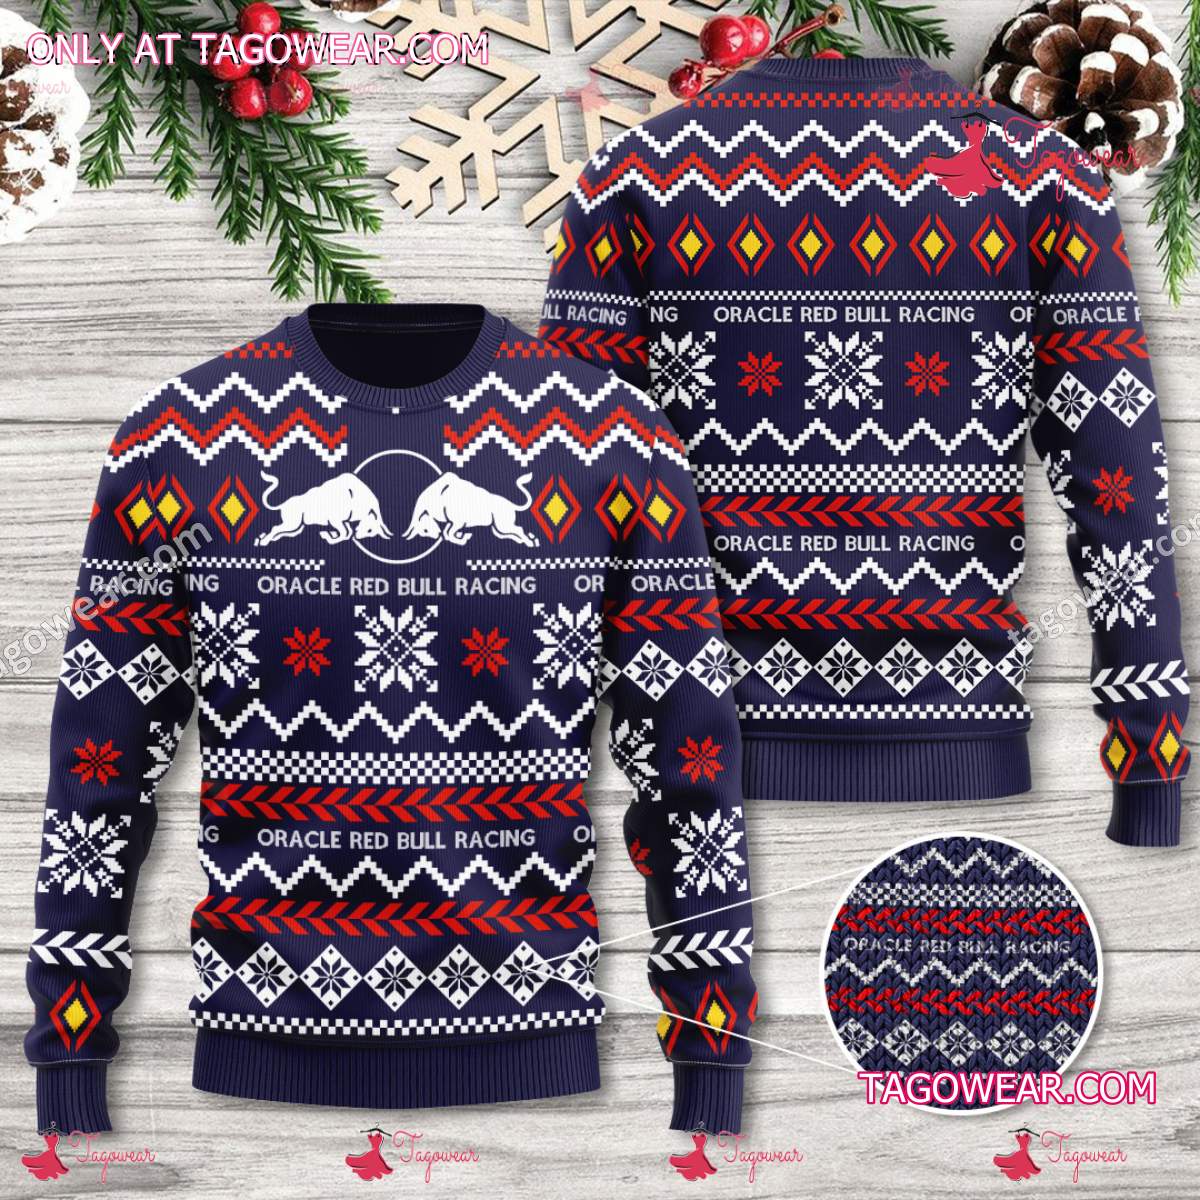 Oracle Red Bull Racing Ugly Christmas Sweater - Tagowear